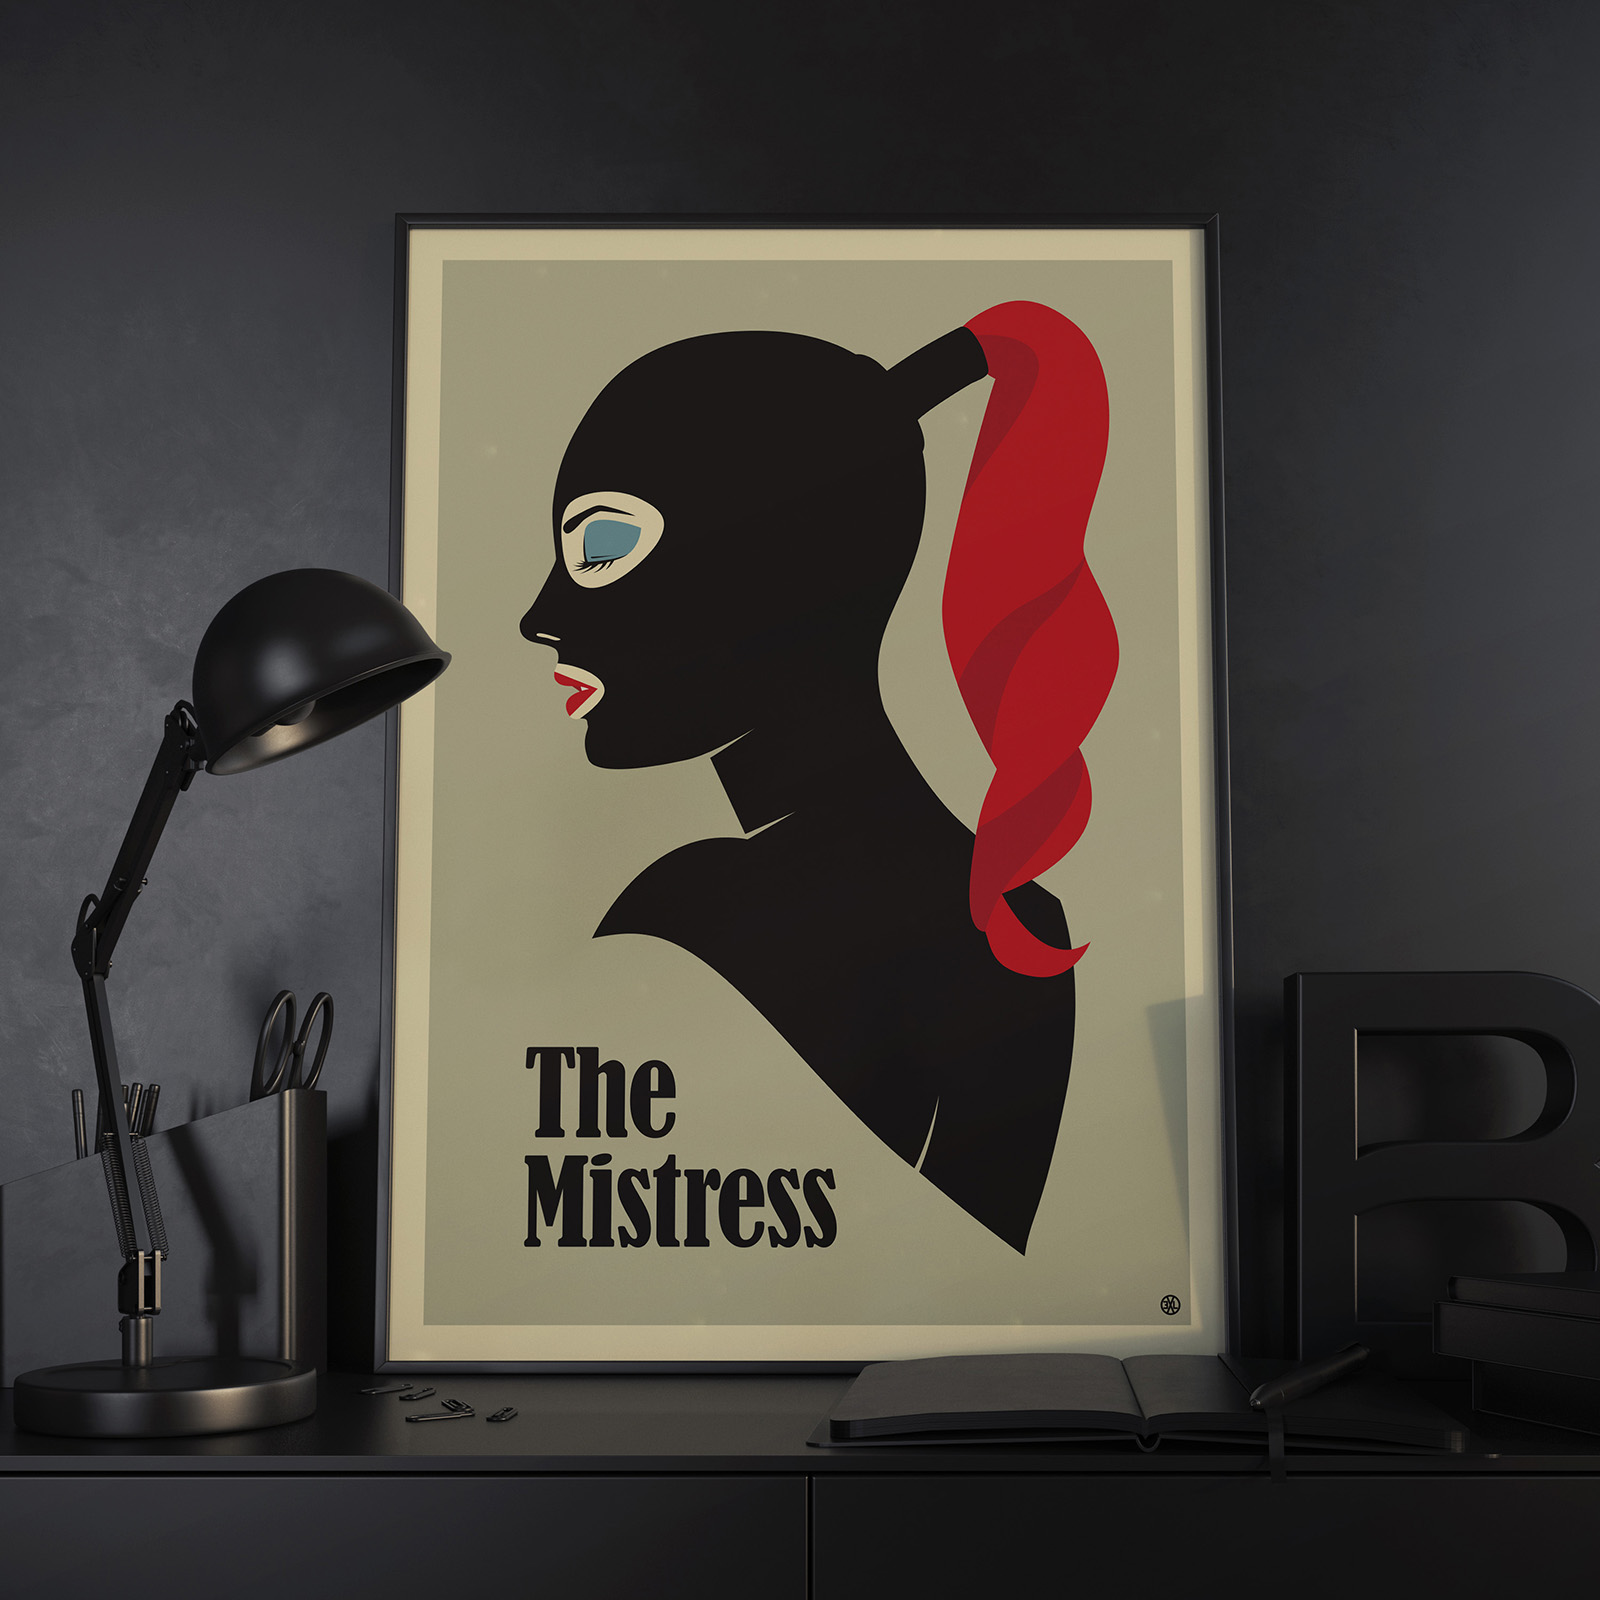 The Mistress - Latex fetish poster by 3xL